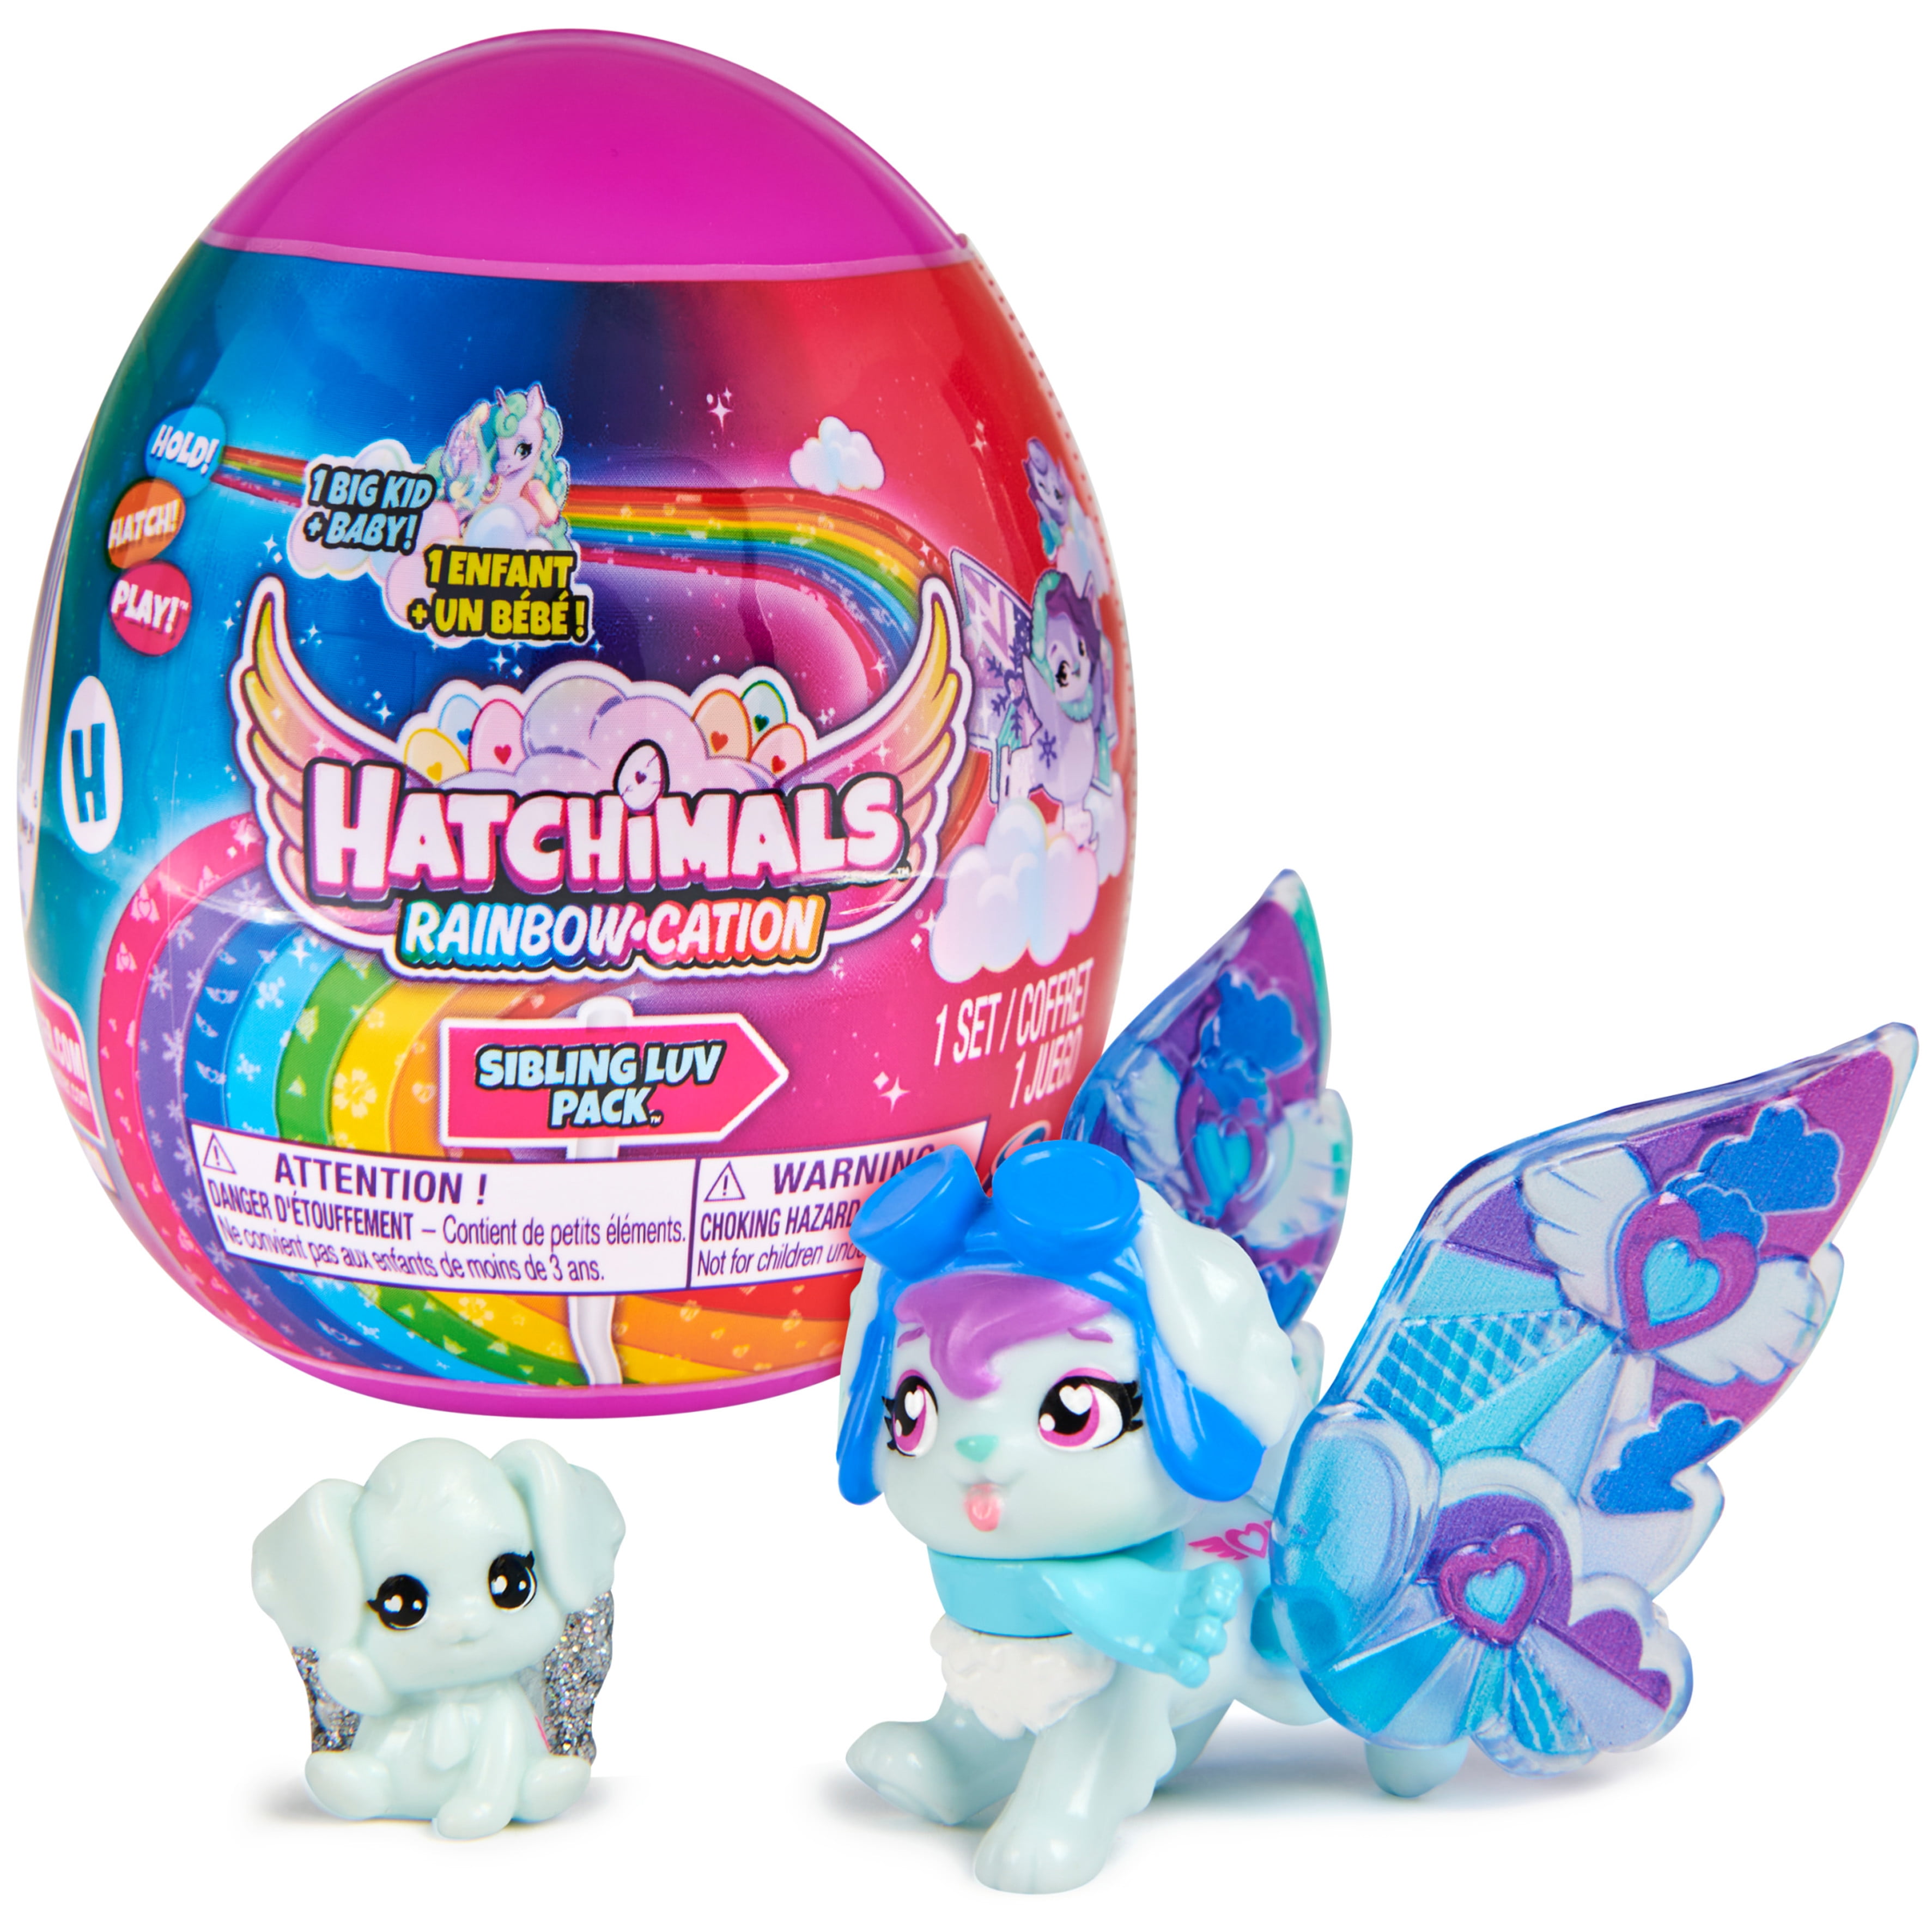 Hatchimals CollEGGtibles Sibling Luv Pack with Blanket (Styles Vary)